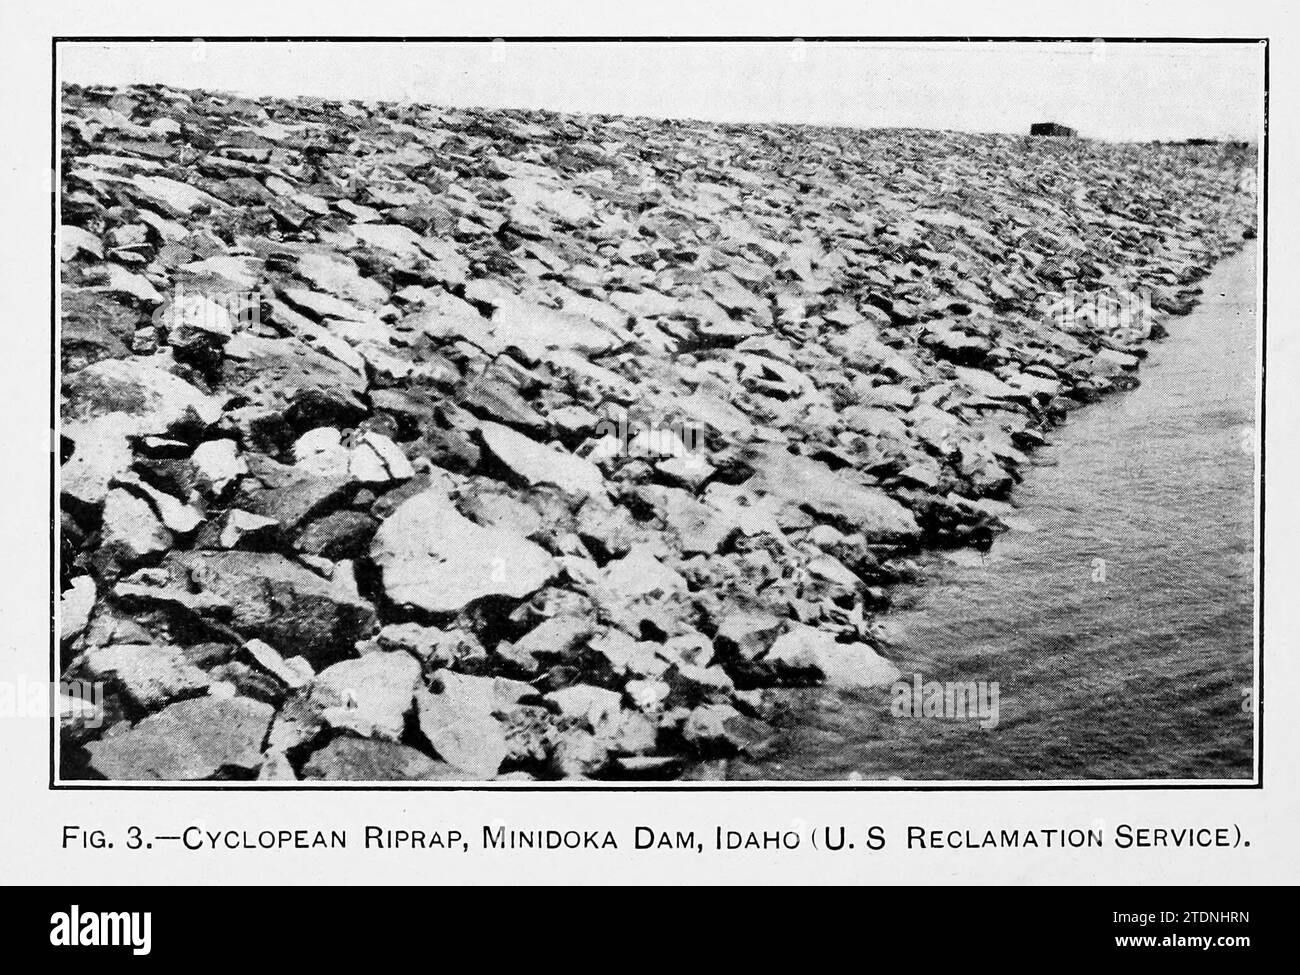 Cyclopean riprap, Minidoka Dam, Idaho from the book ' The storage of water for irrigation purposes ' by Fortier, Samuel; Bixby, F. L; United States. Office of Experiment Stations; United States. Department of Agriculture Stock Photo